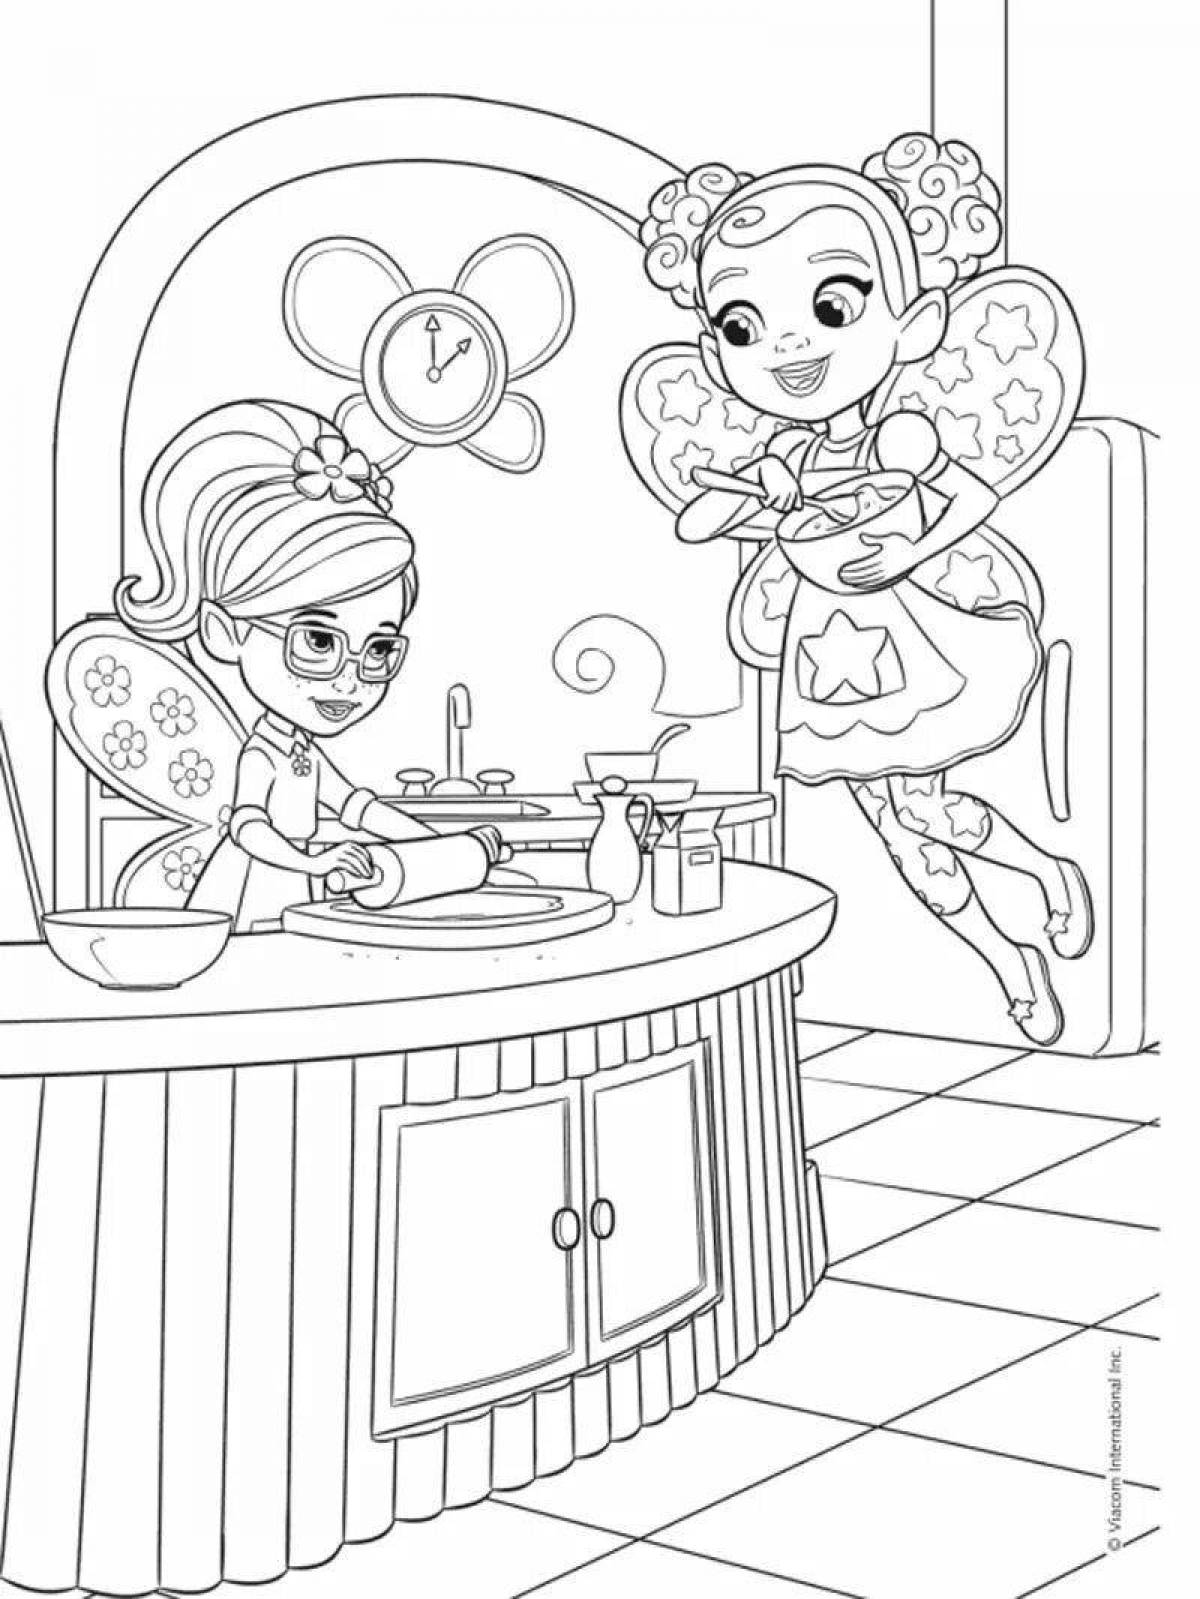 Color-bright cafe coloring page